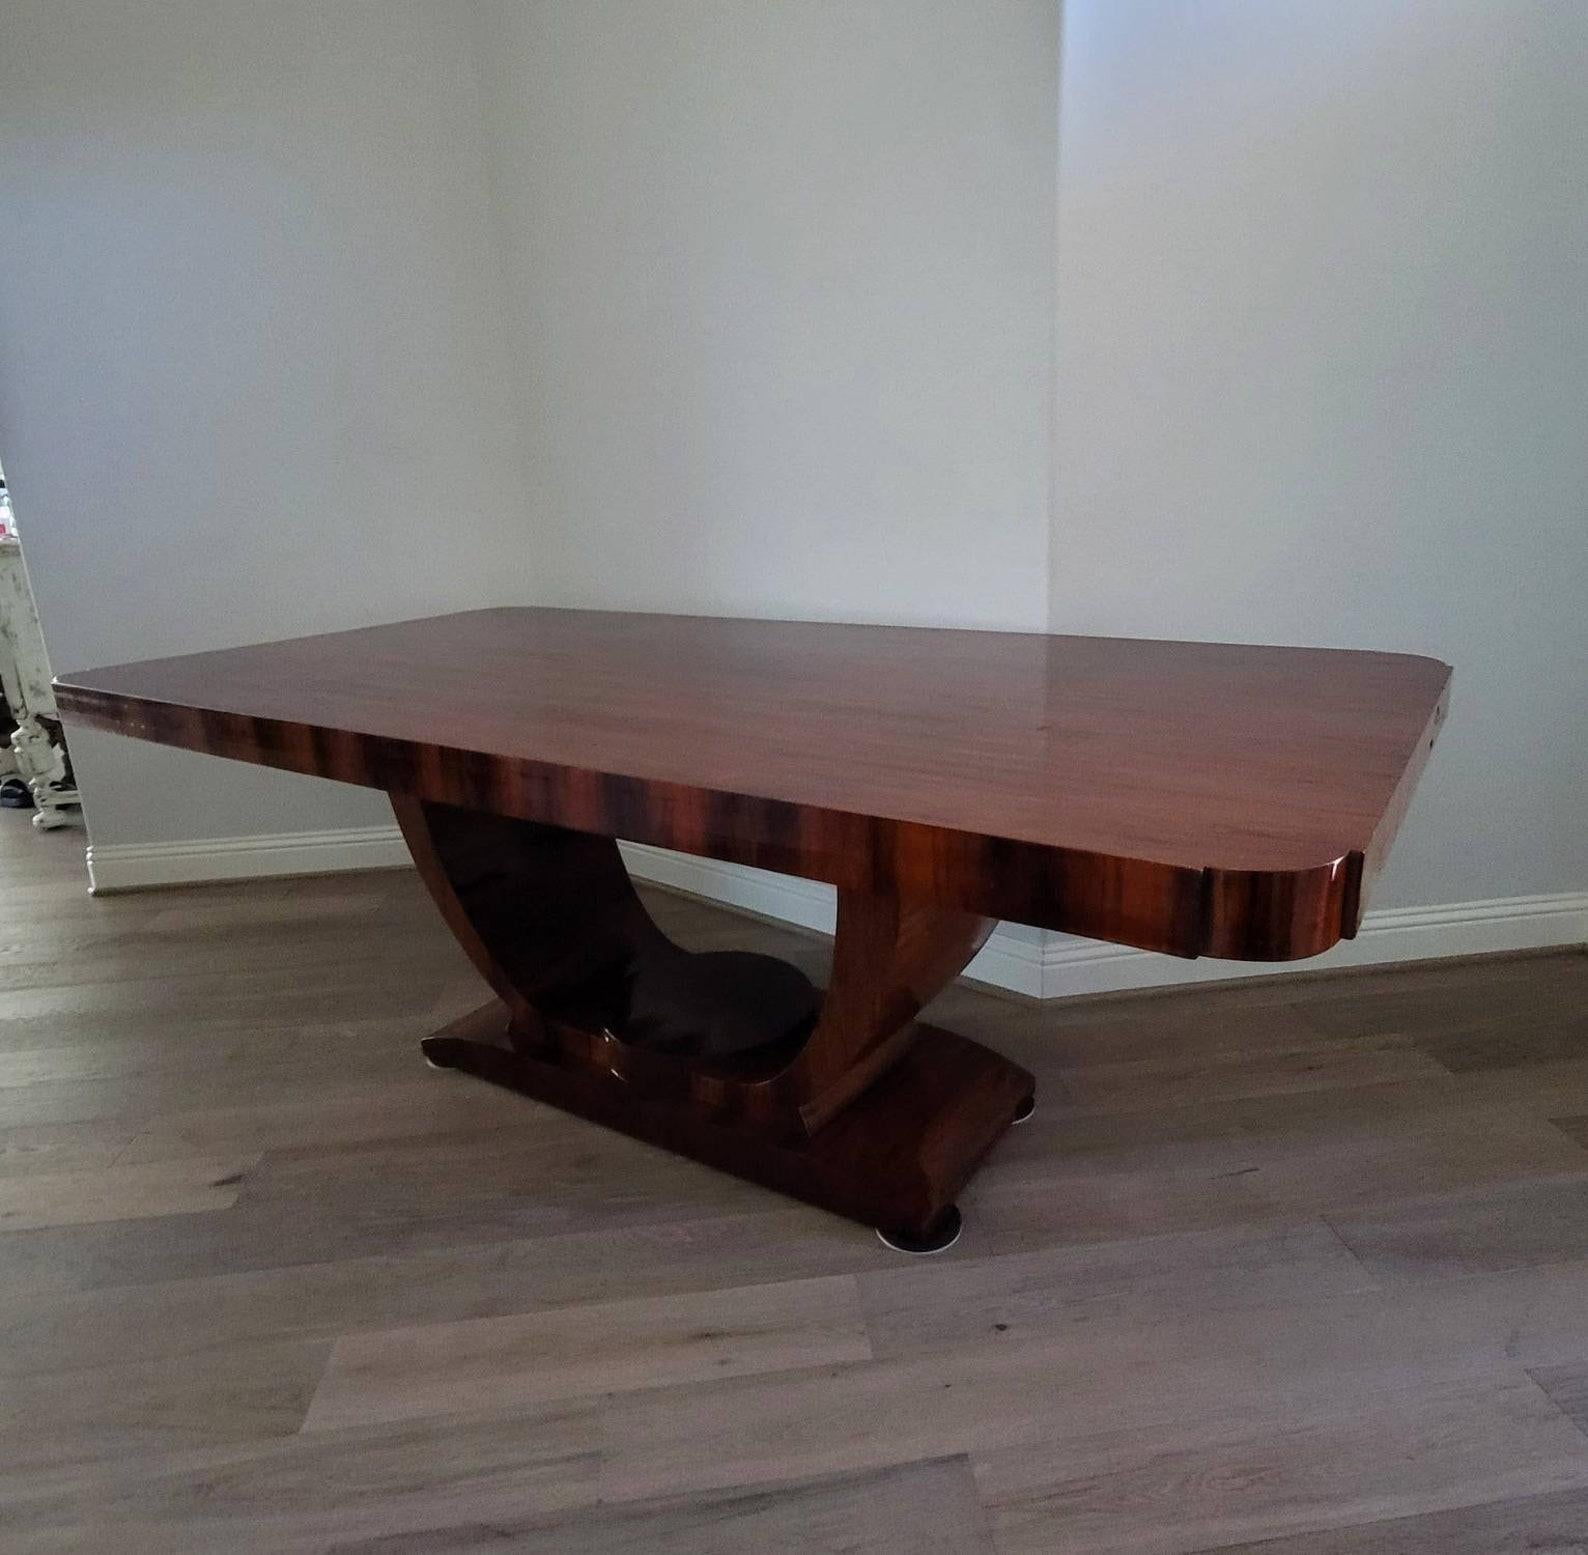 Monumental French Art Deco Rosewood Gondola Dining Table, Ruhlmann Style For Sale 1